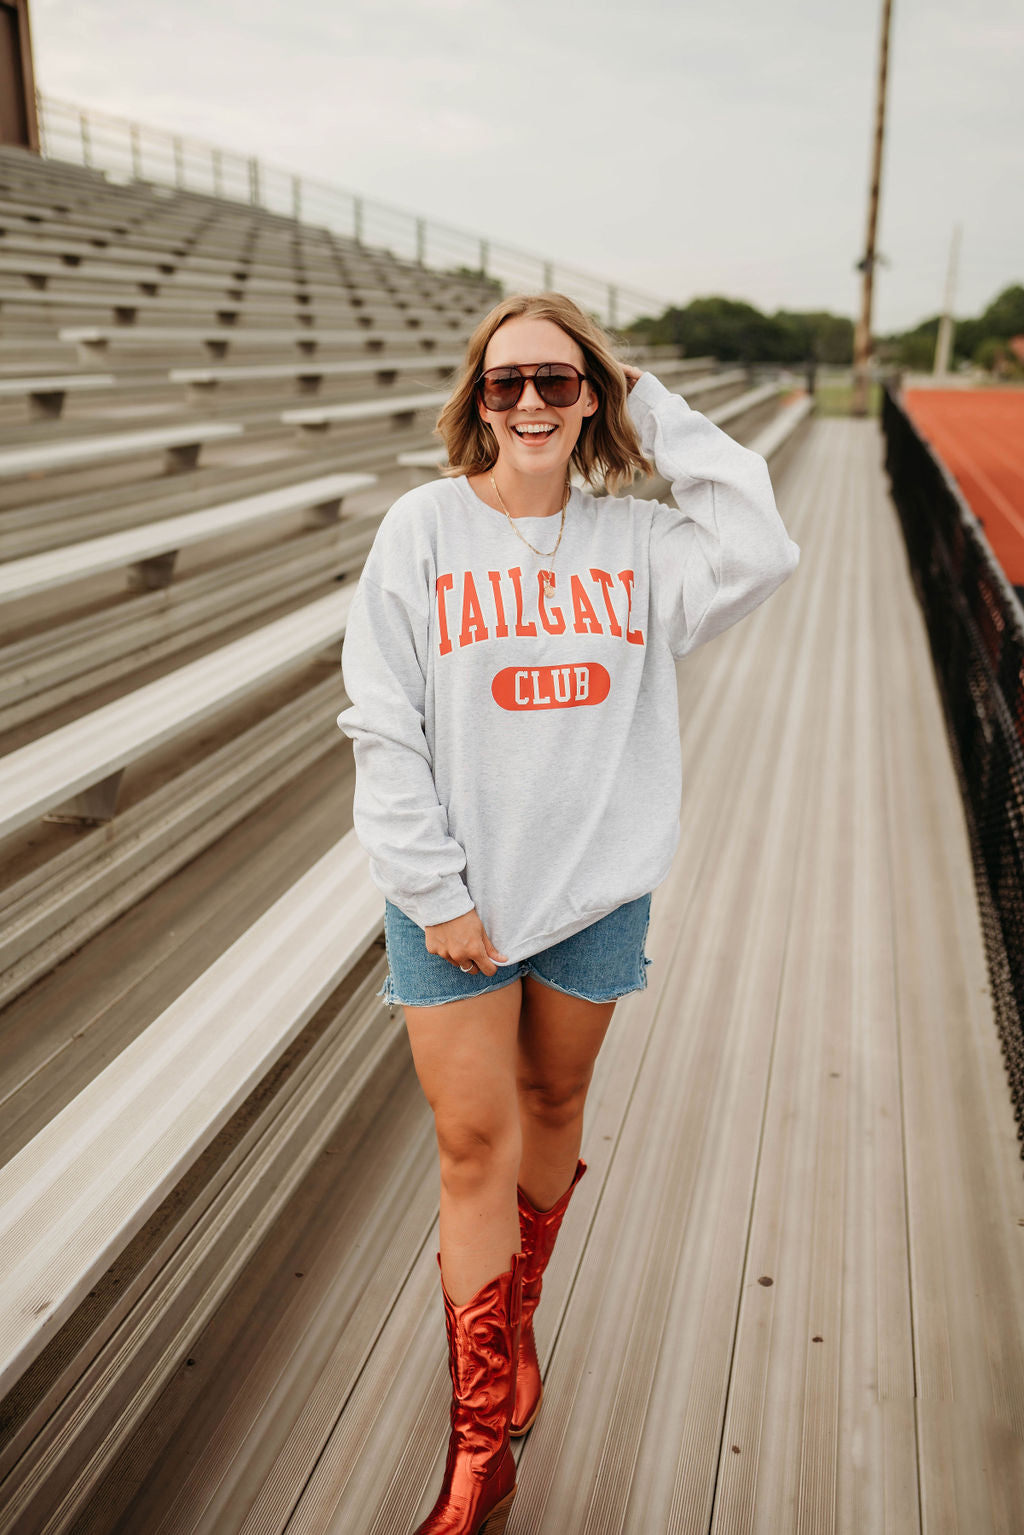 Tailgate Club Pullover